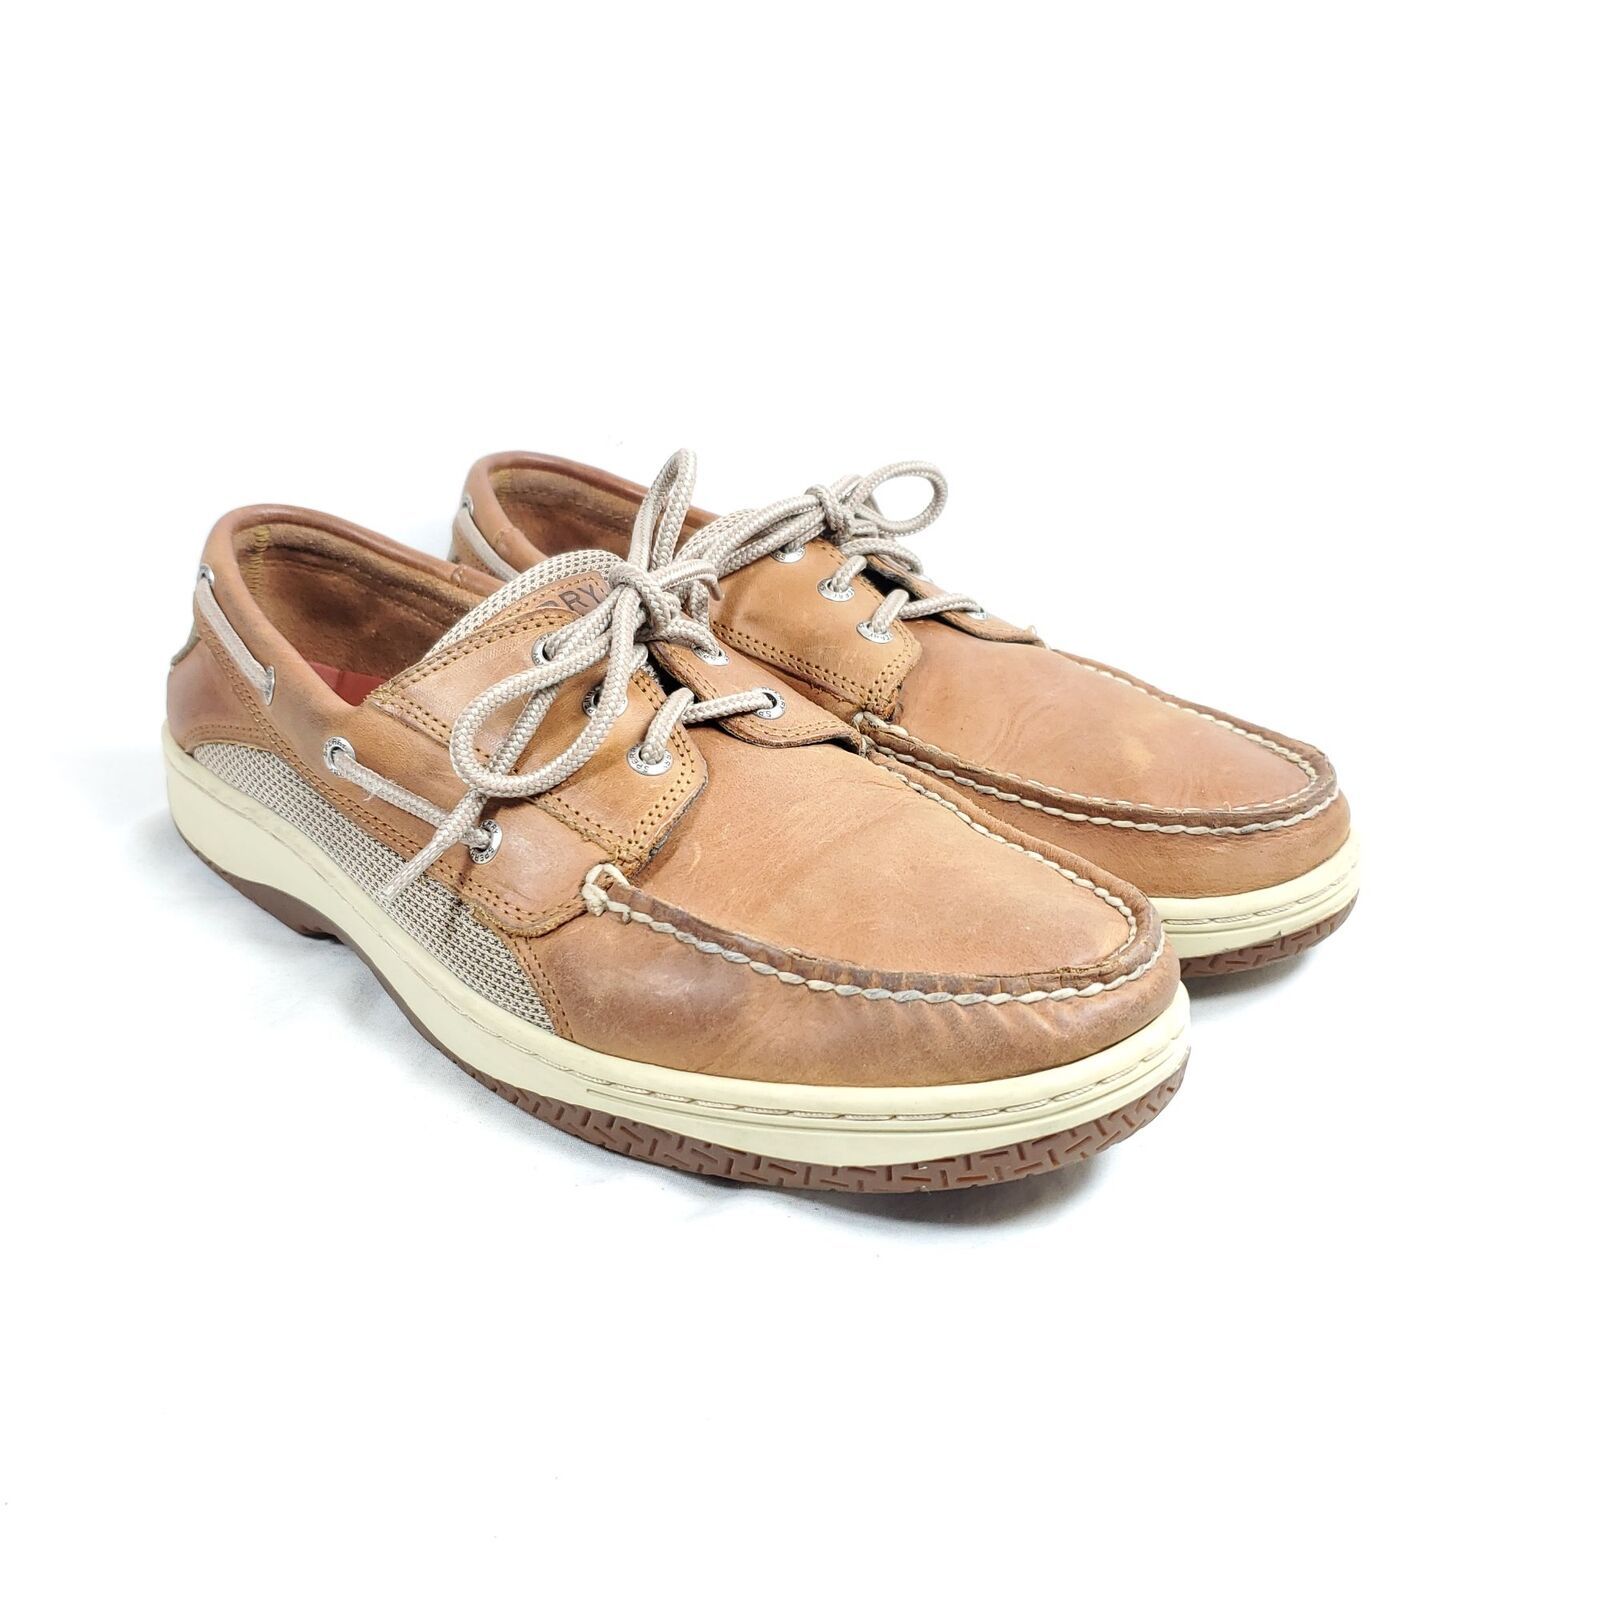 Primary image for Sperry Top-Sider Boat Shoes Men's Size 12 Brown Leather